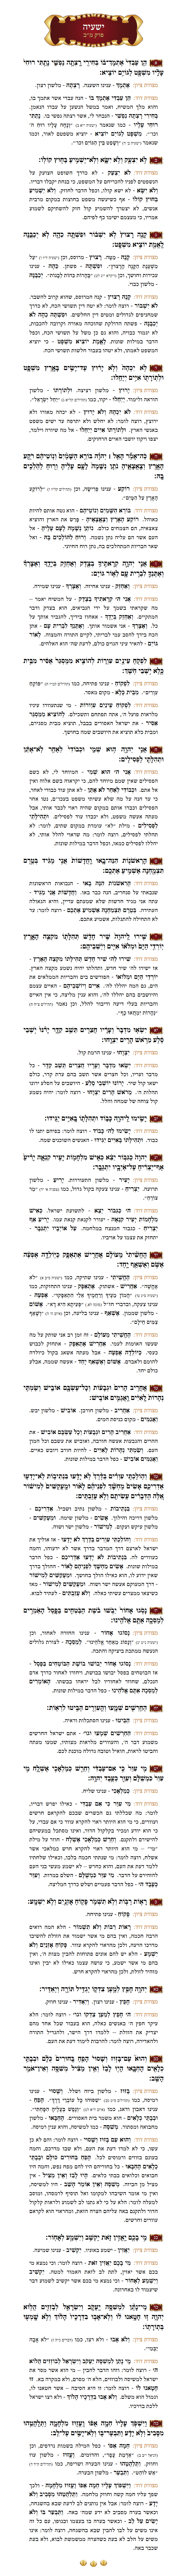 Sefer Yeshayohu Chapter 42 with commentary